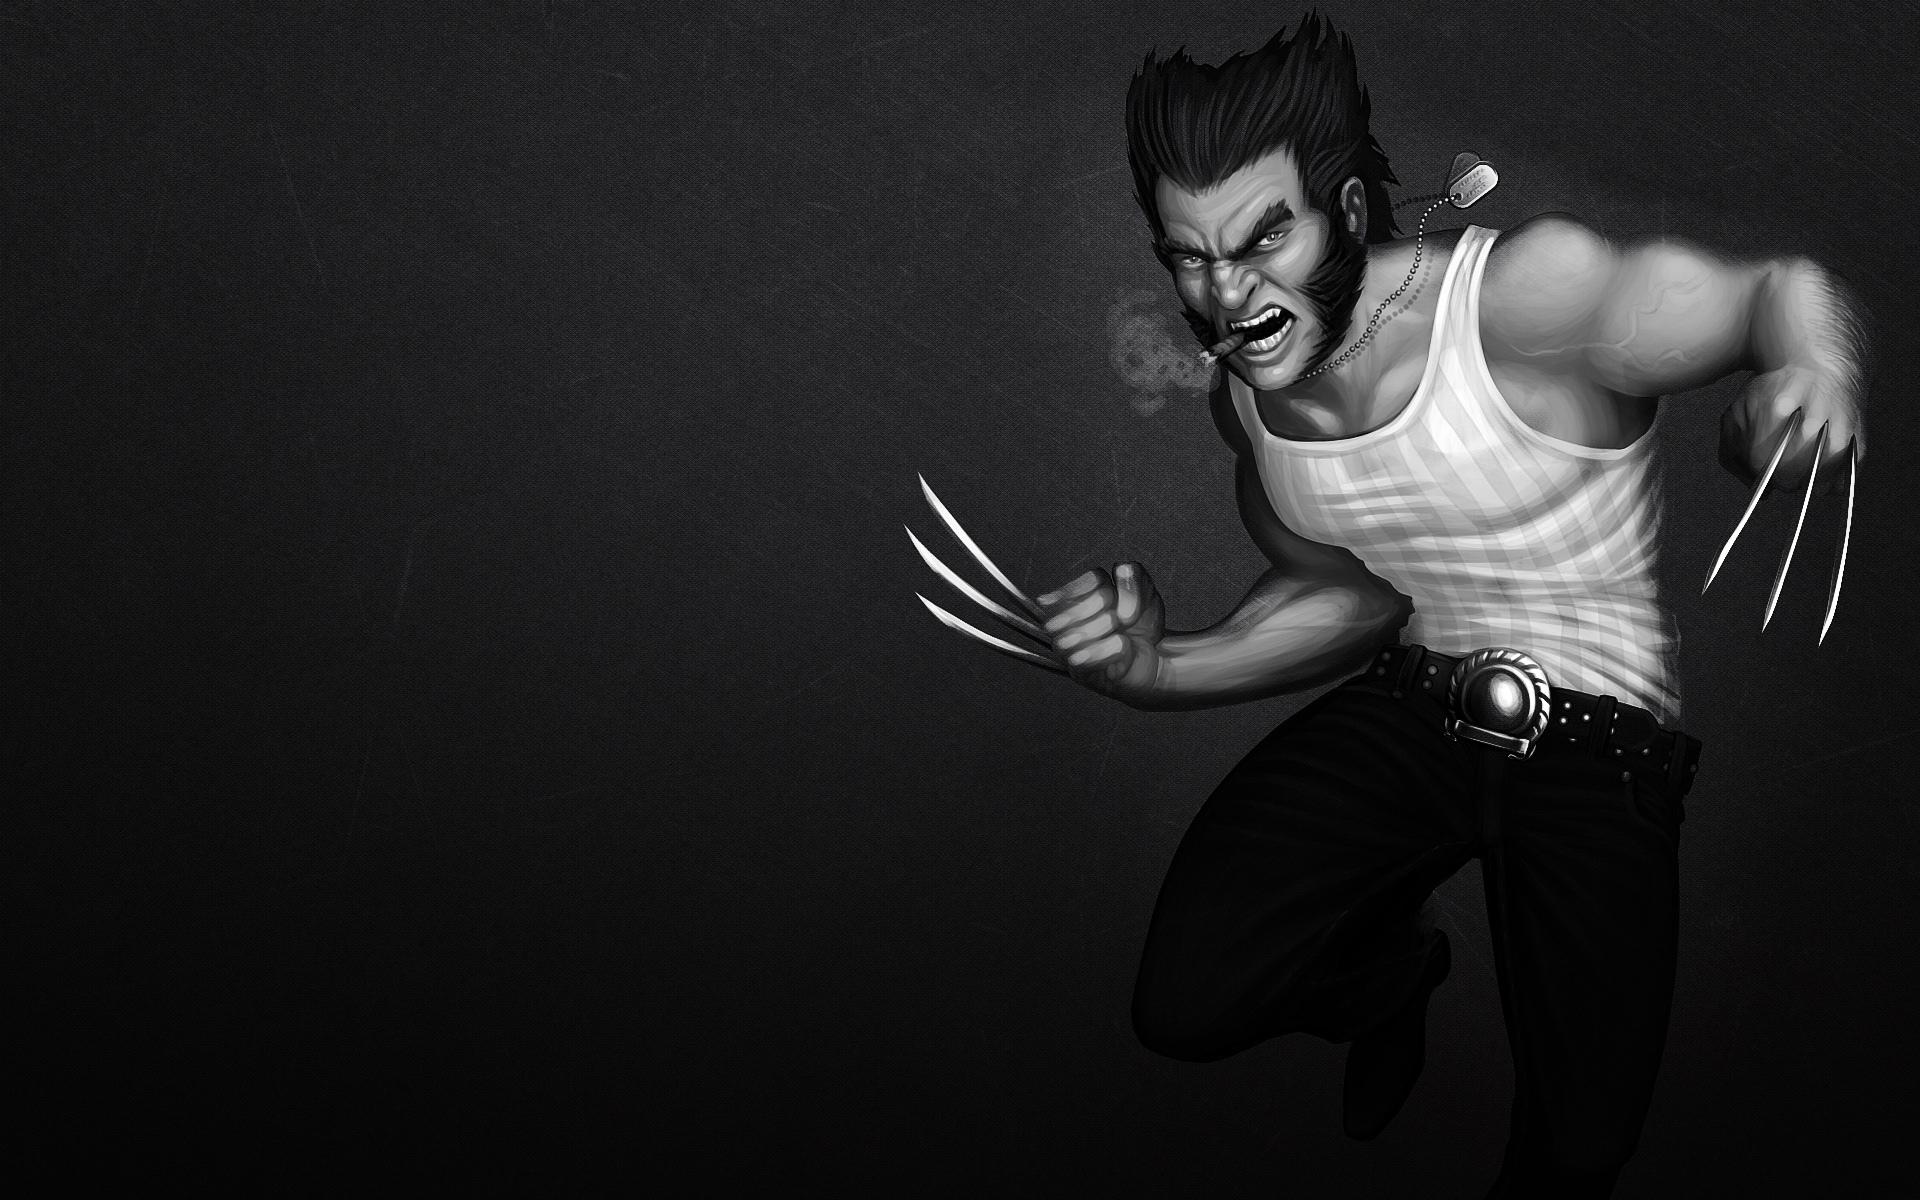 logan wolverine wallpaper,muscle,fictional character,arm,black and white,batman